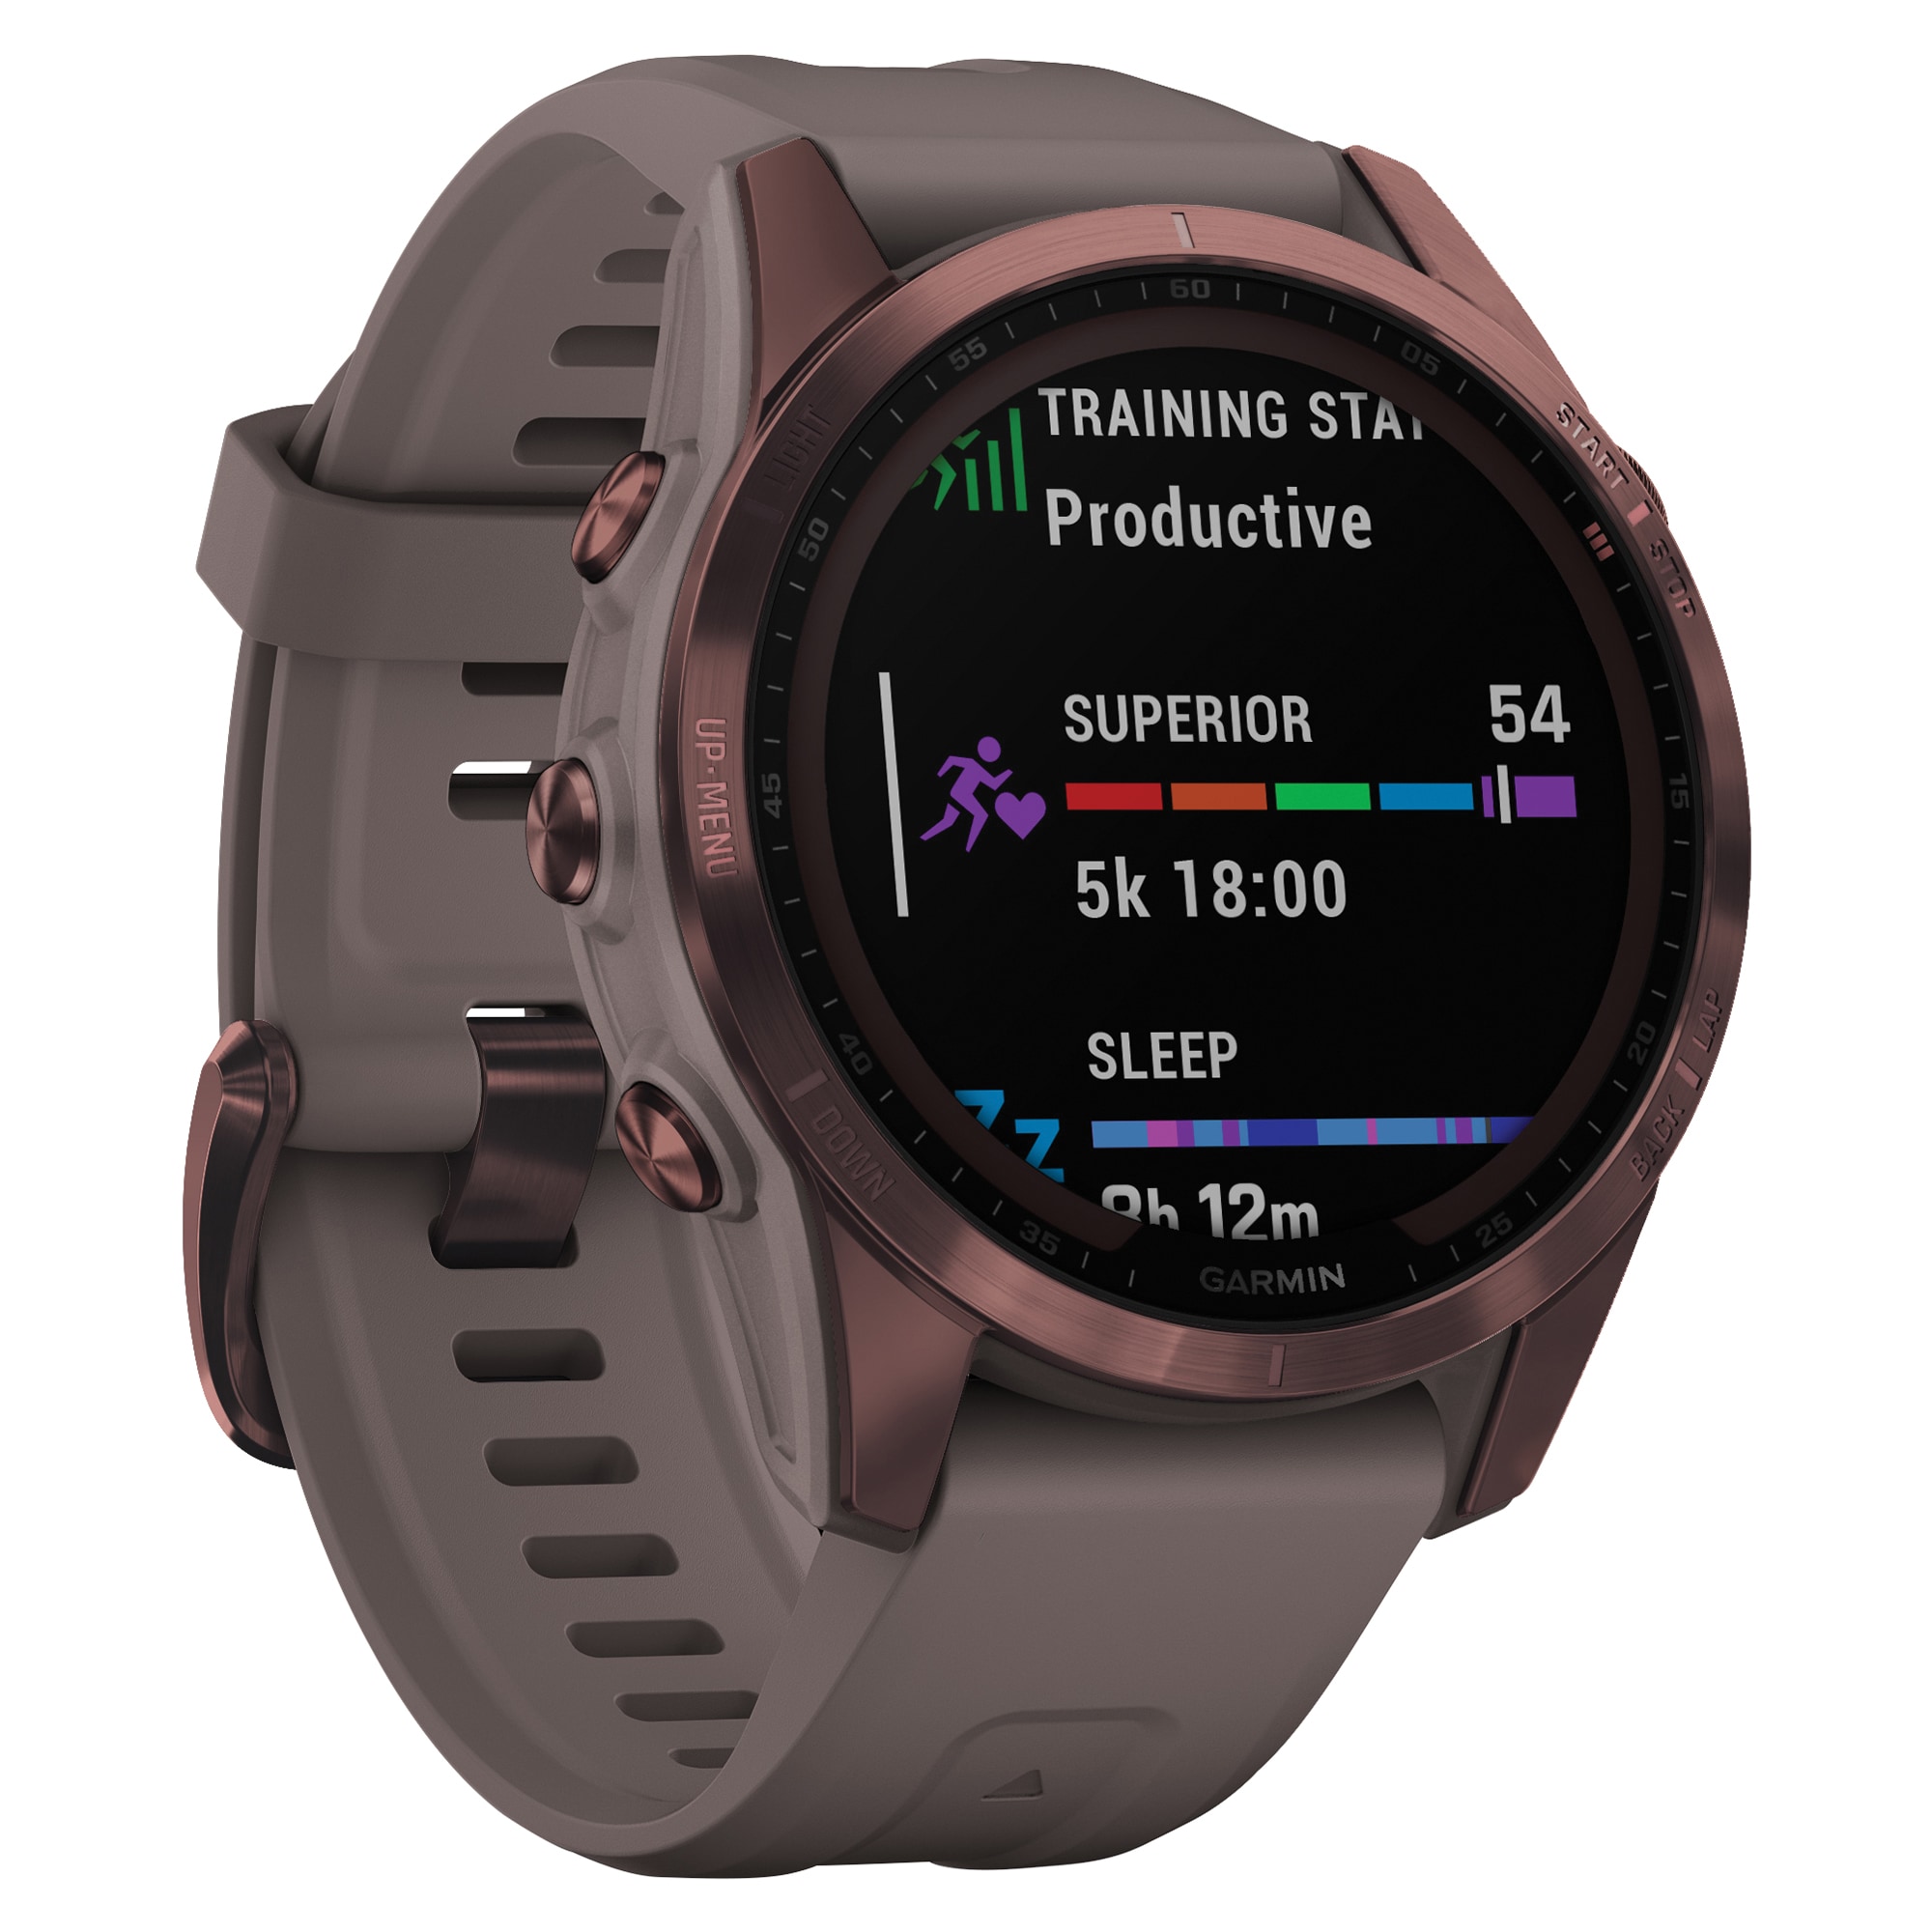  Garmin Venu 2 Plus, GPS Smartwatch with Call and Text, Advanced  Health Monitoring and Fitness Features, Slate with Black Band : Electronics